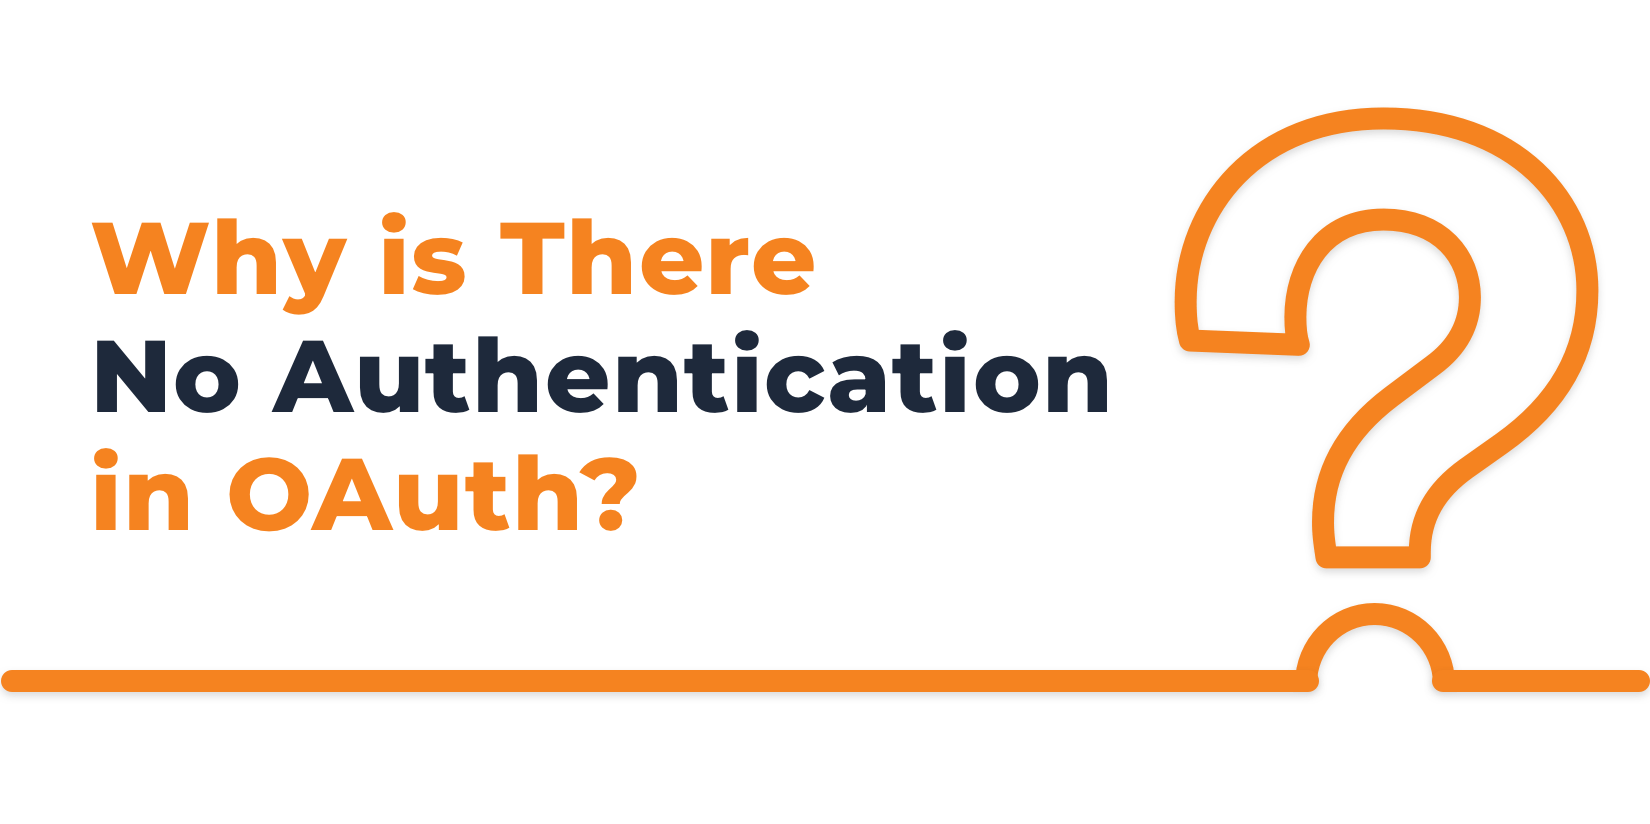 Why is there no authentication in OAuth?